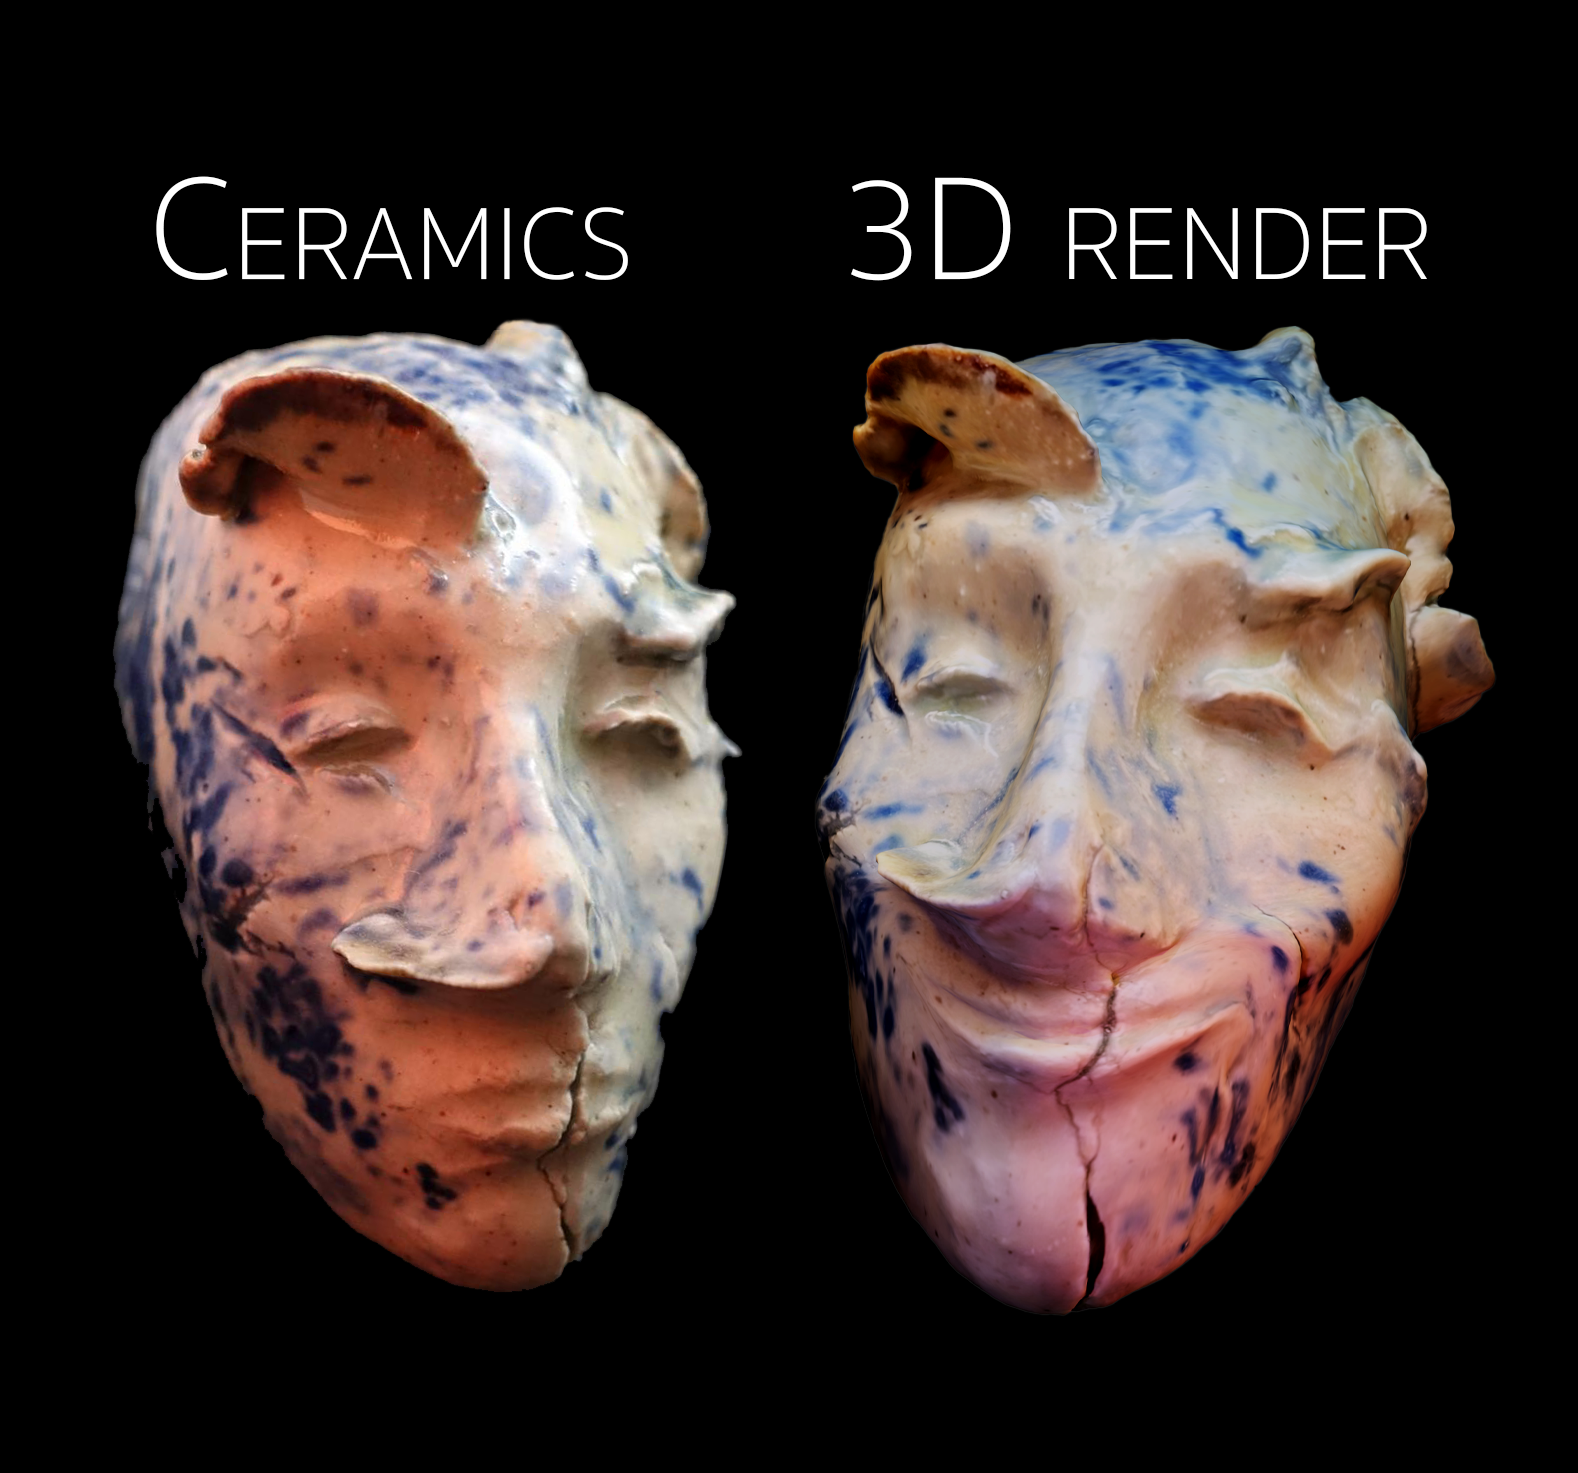 A ceramic photo and a ceramic animated 3d render